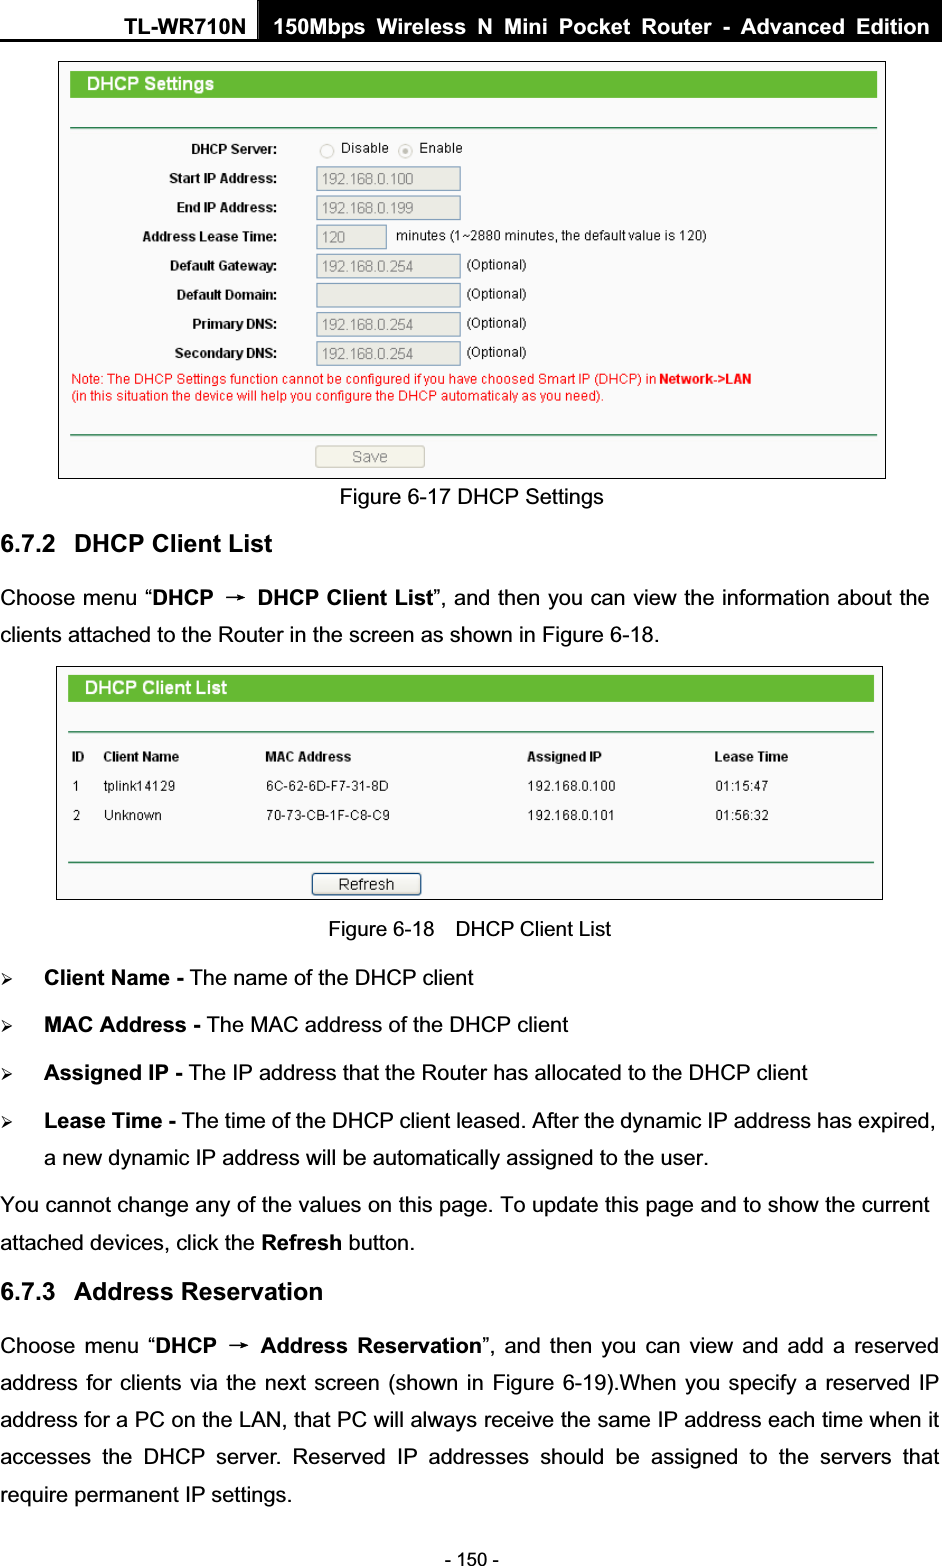 TL-WR710N  150Mbps Wireless N Mini Pocket Router - Advanced Edition- 150 - Figure 6-17 DHCP Settings 6.7.2 DHCP Client List Choose menu “DHCP ė  DHCP Client List”, and then you can view the information about the clients attached to the Router in the screen as shown in Figure 6-18. Figure 6-18    DHCP Client List ¾Client Name-The name of the DHCP client   ¾MAC Address - The MAC address of the DHCP client   ¾Assigned IP - The IP address that the Router has allocated to the DHCP client ¾Lease Time- The time of the DHCP client leased. After the dynamic IP address has expired, a new dynamic IP address will be automatically assigned to the user.     You cannot change any of the values on this page. To update this page and to show the current attached devices, click the Refresh button. 6.7.3 Address Reservation Choose menu “DHCP ė Address Reservation”, and then you can view and add a reserved address for clients via the next screen (shown in Figure 6-19).When you specify a reserved IP address for a PC on the LAN, that PC will always receive the same IP address each time when it accesses the DHCP server. Reserved IP addresses should be assigned to the servers that require permanent IP settings.   